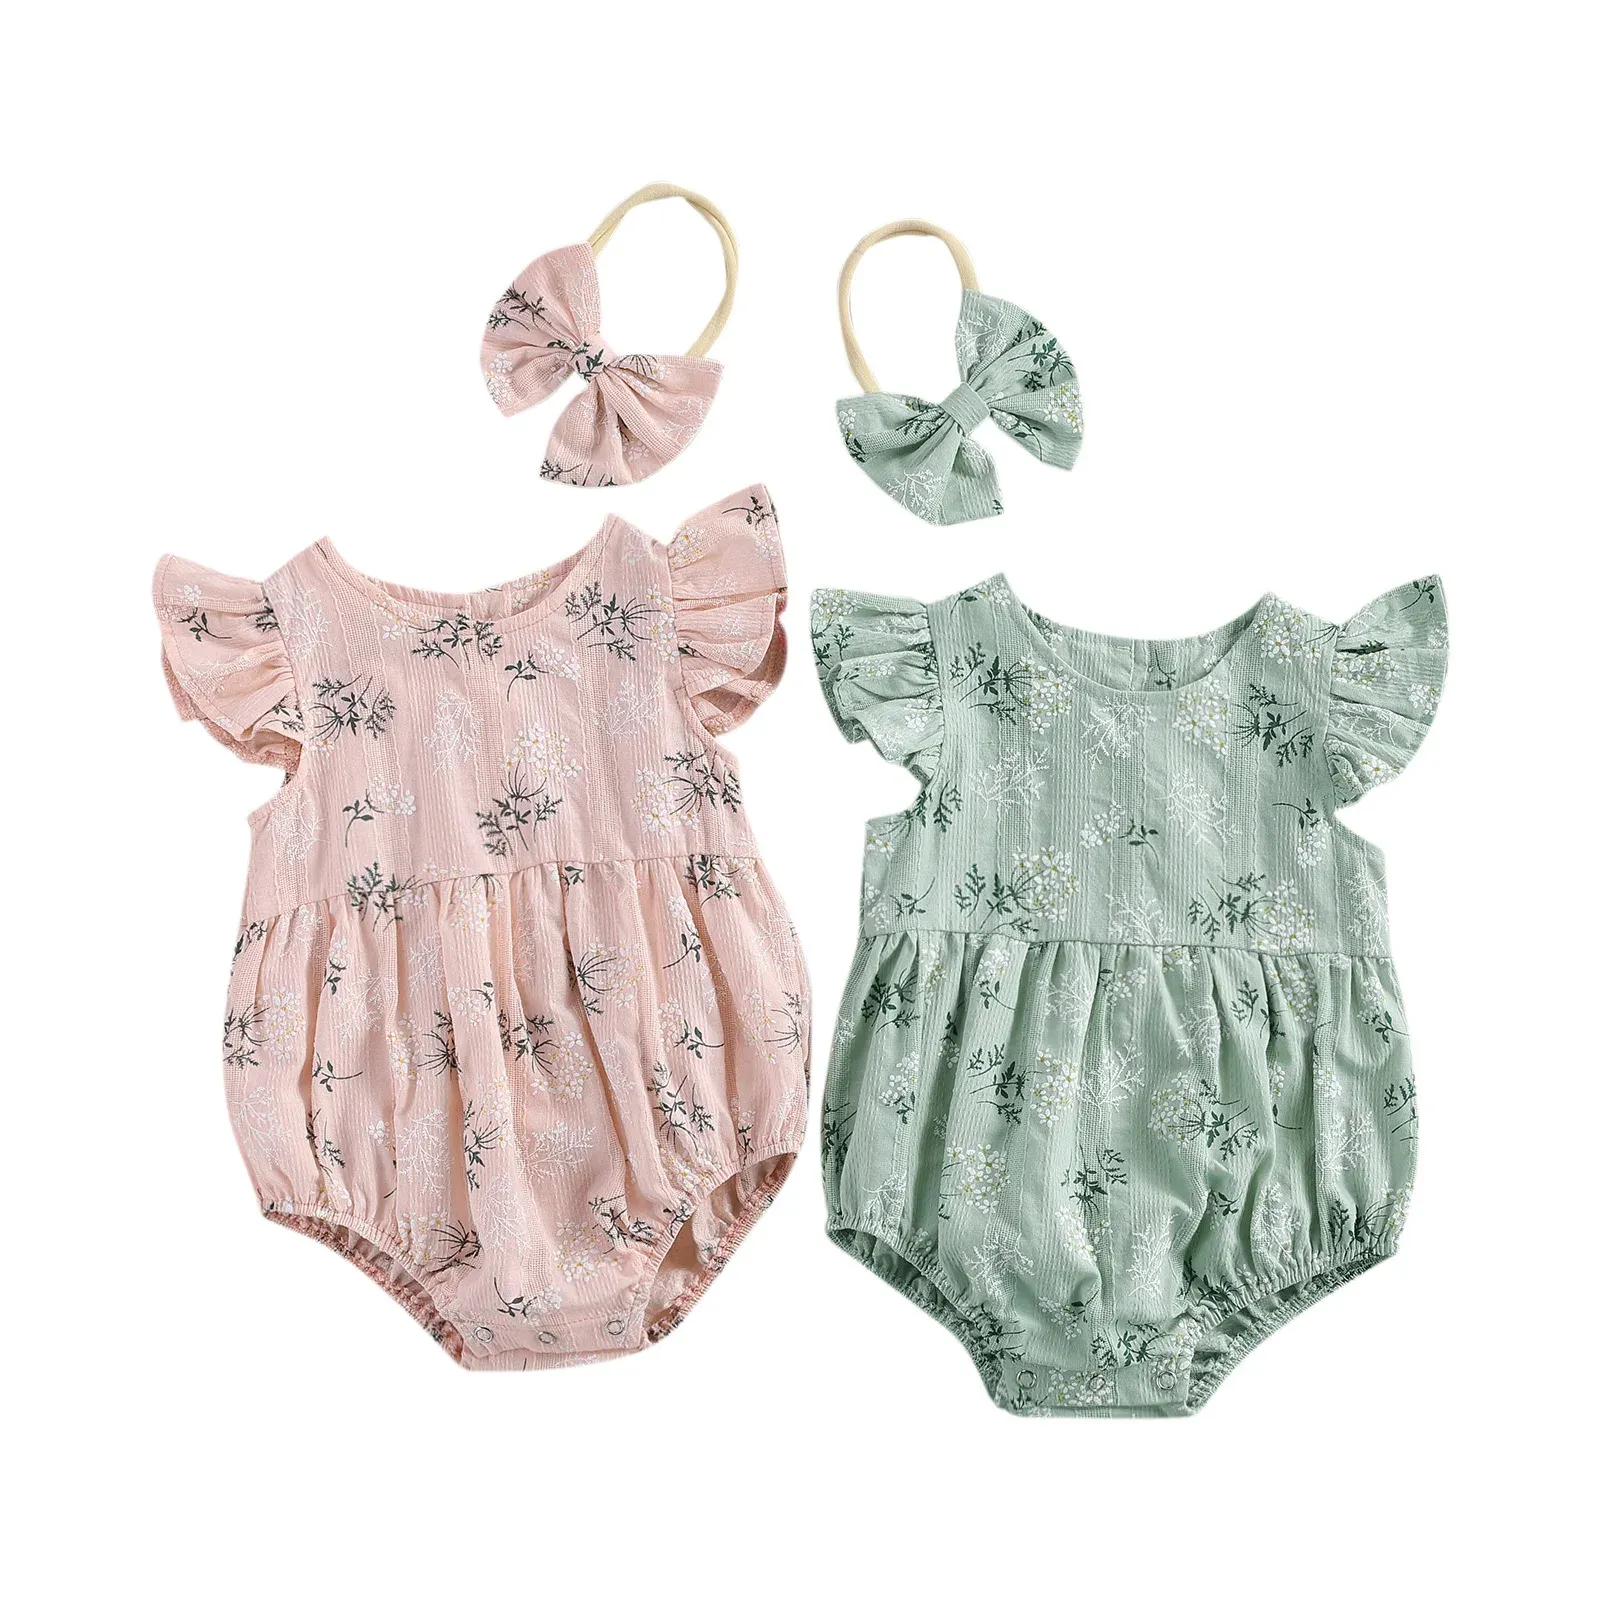 One-Pieces 2021 Baby Summer Clothing Baby Cotton Jumpsuit Headband Floral Print Round Collar Fly Sleeve Bodysuit Hair Band Girls Pink/Green